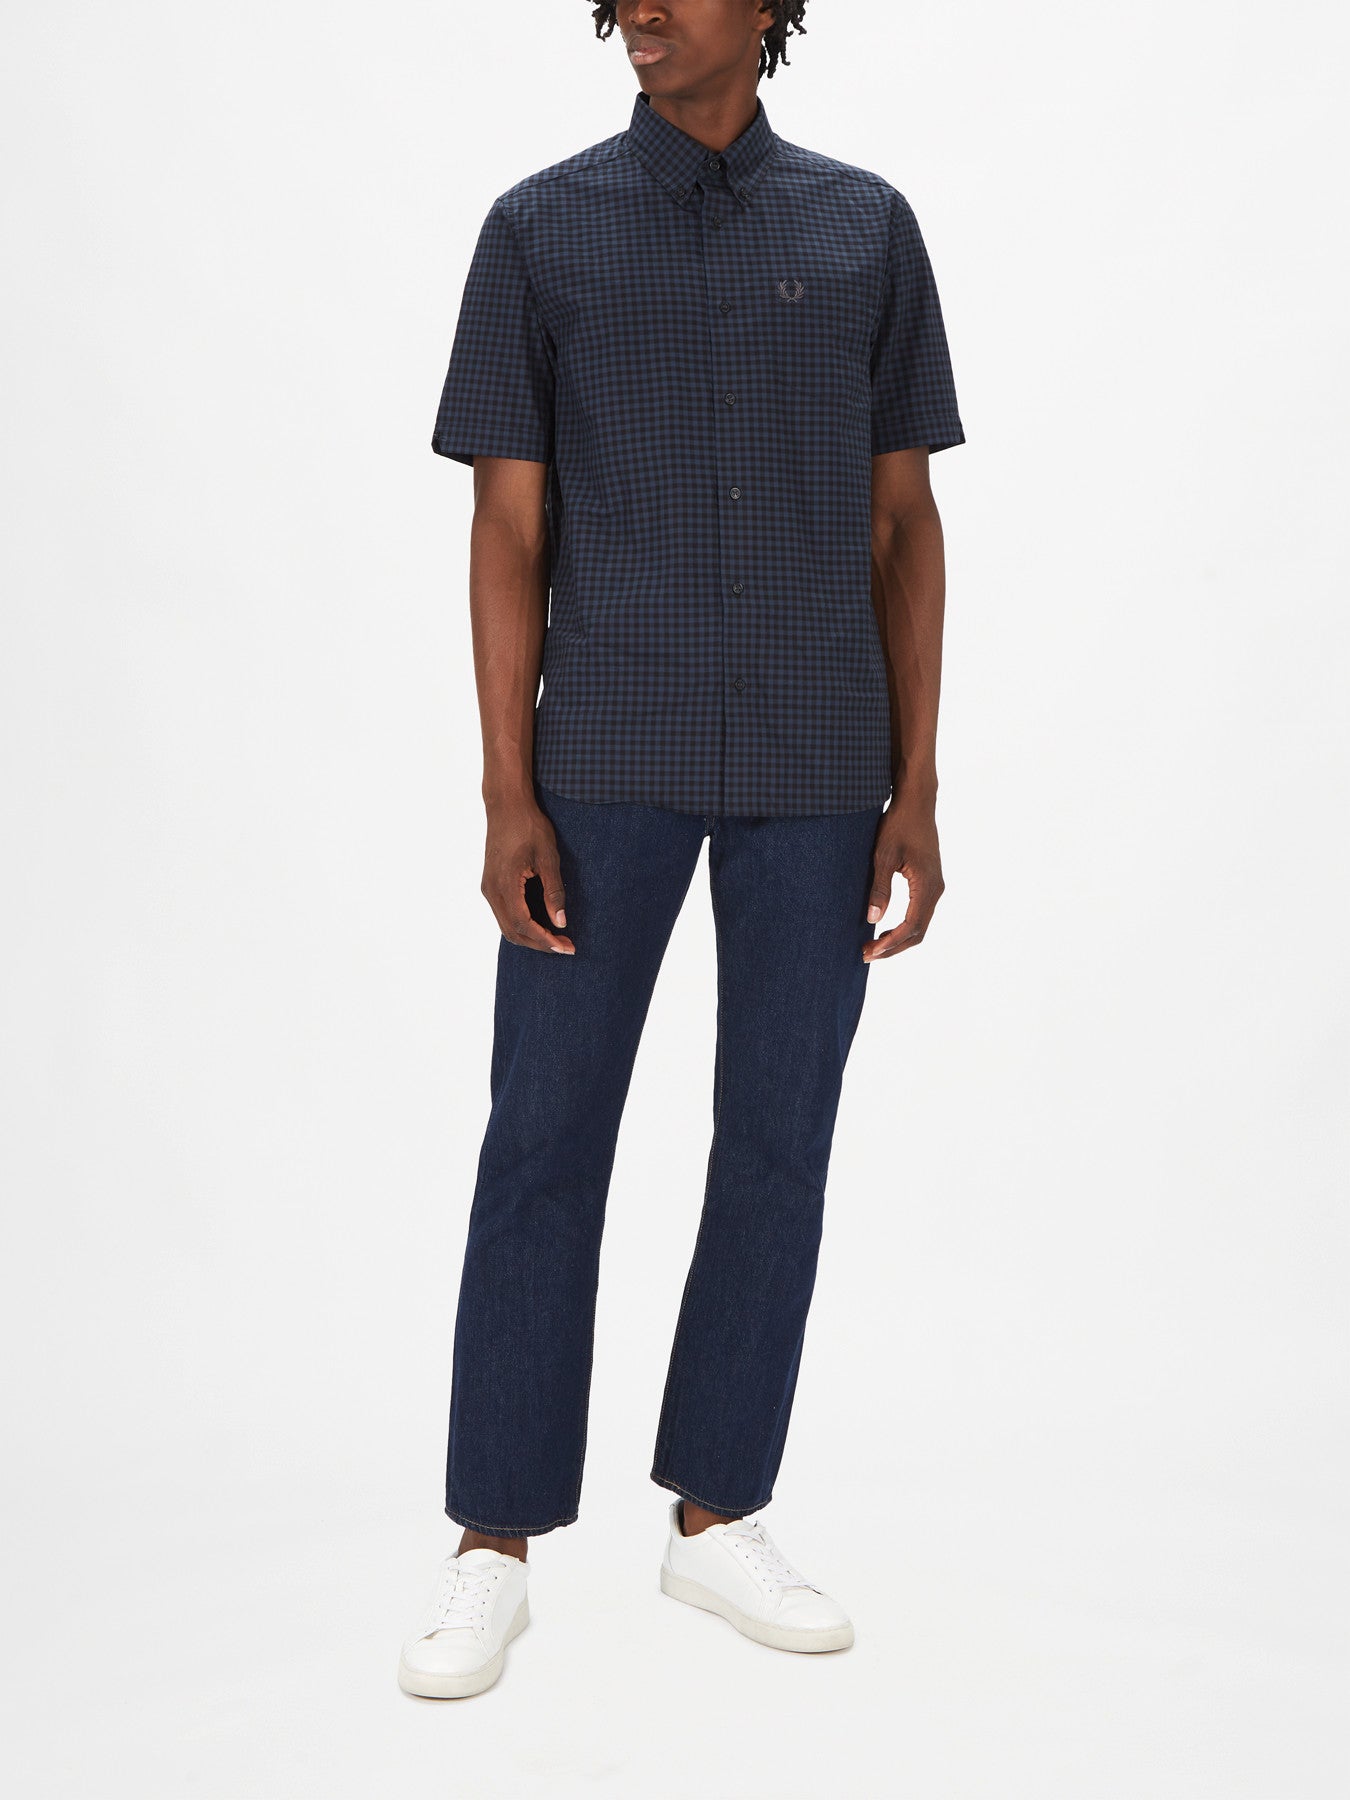 Fred Perry Distorted Gingham Shirt